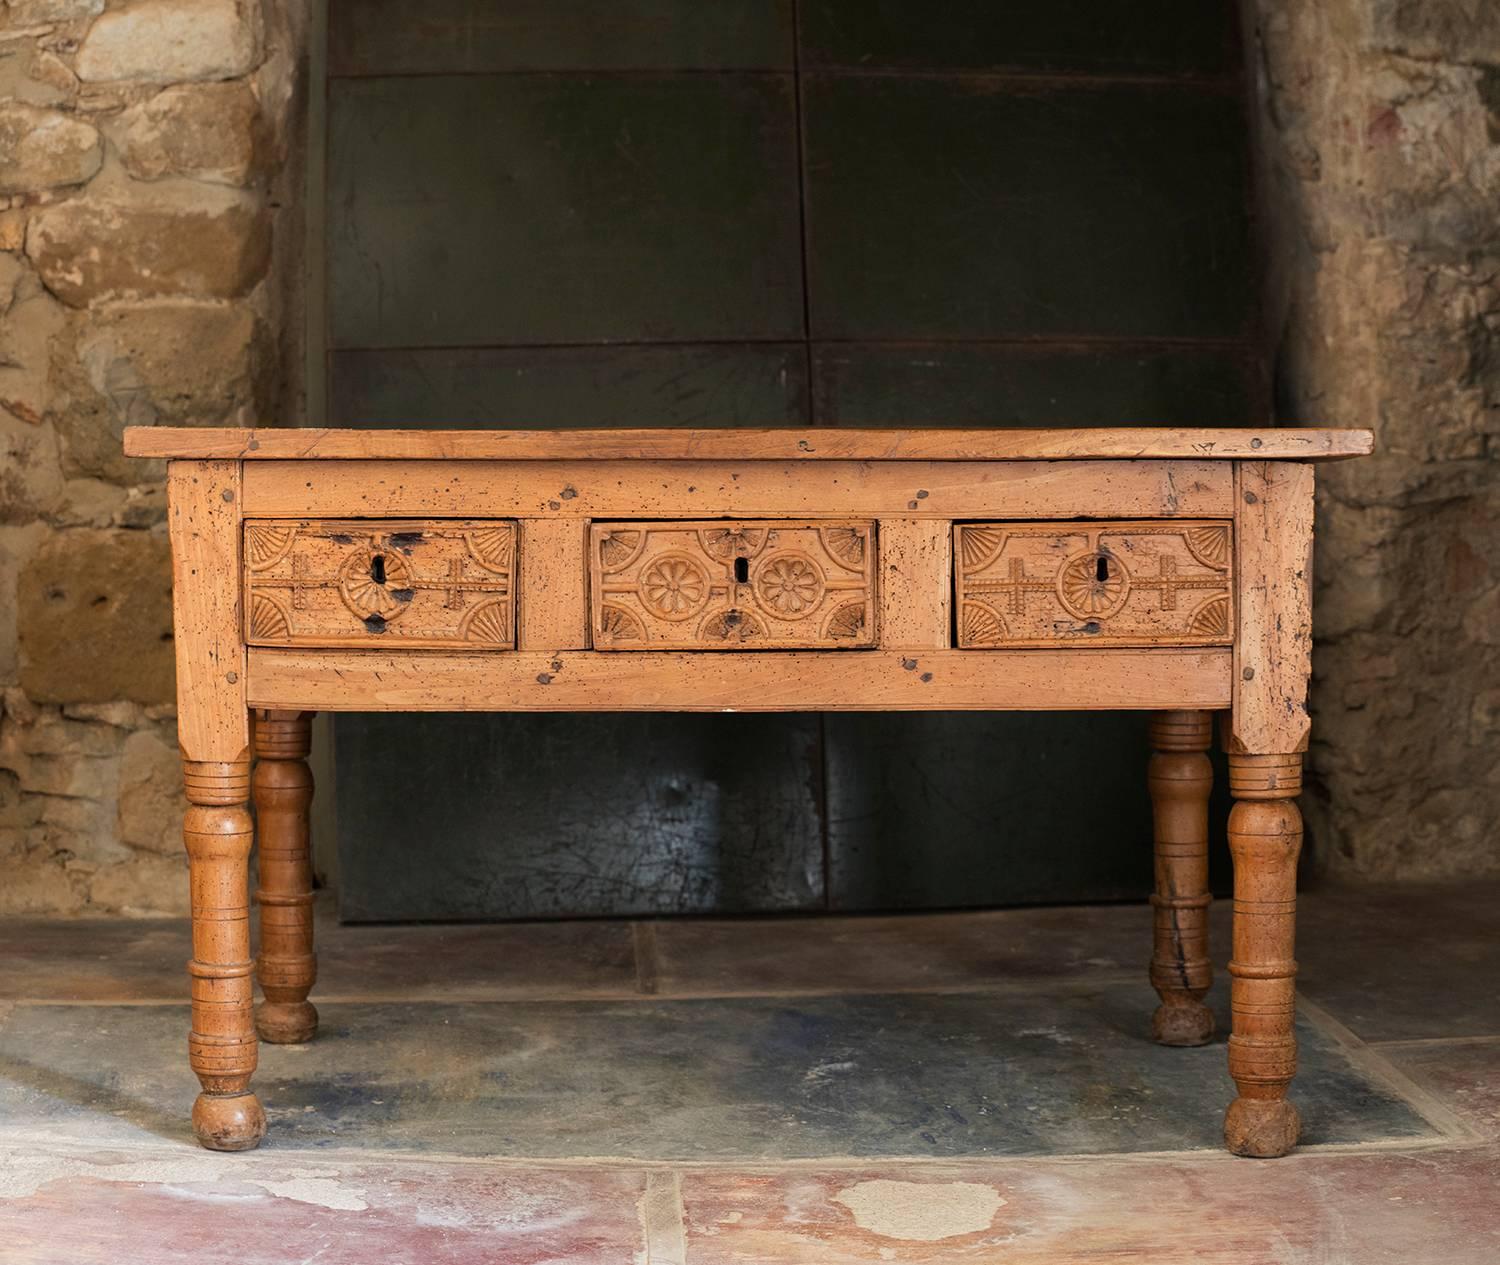 An outstanding 18th century table from Spain.
With three very deep hand carved drawers.
Elegant and warm patine from the years of use.
This table serves beautifully not only as a writing table but as a console as well.